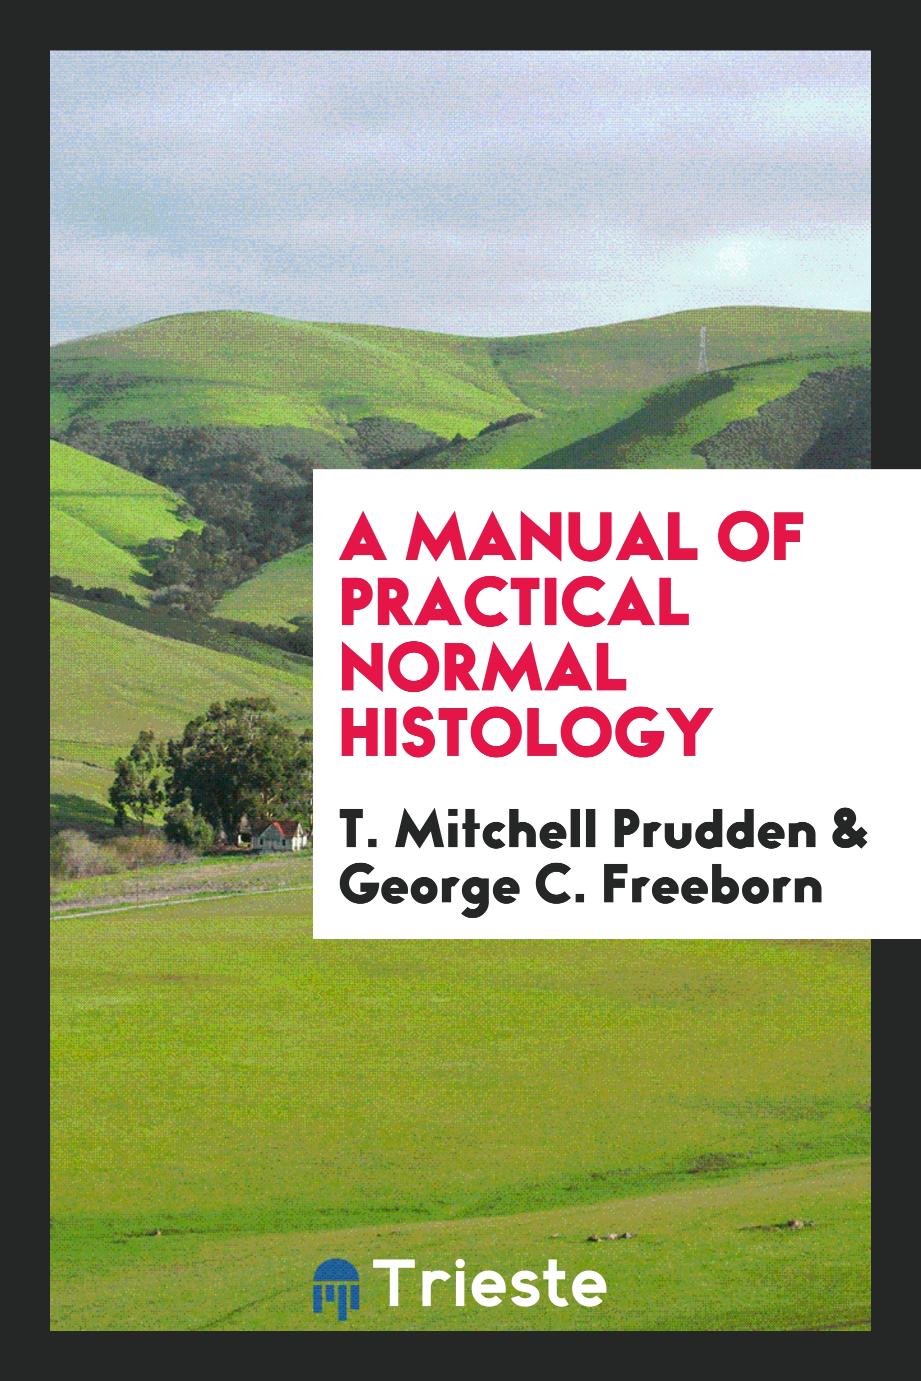 A manual of practical normal histology